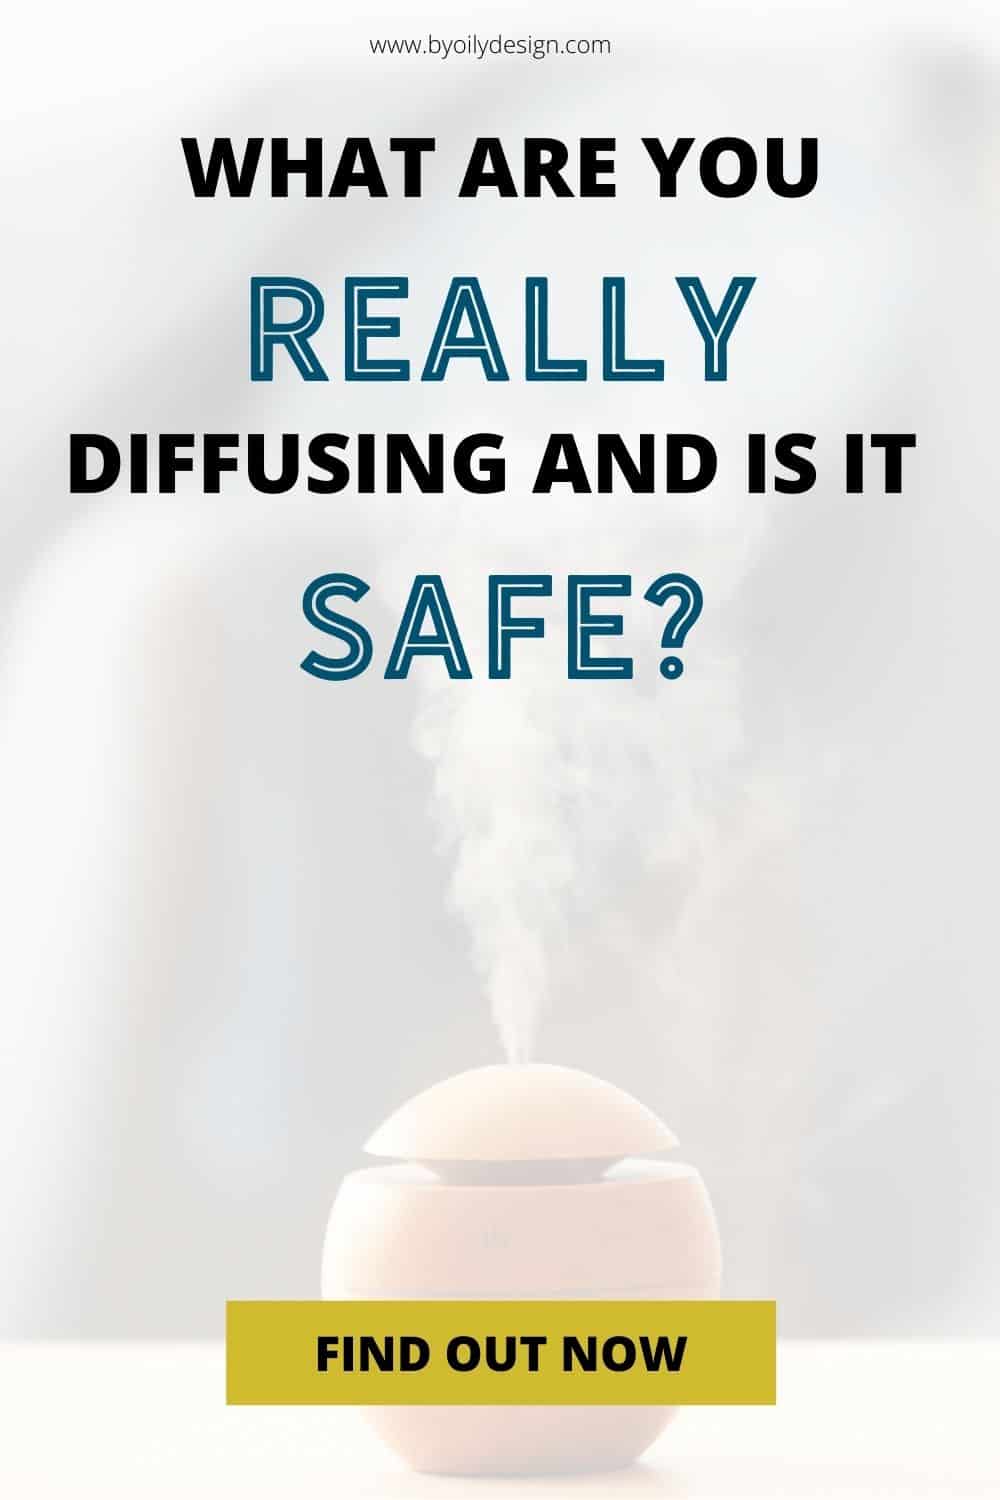 Are Essential Oils and Oil Diffusers Safe? – Smart Air